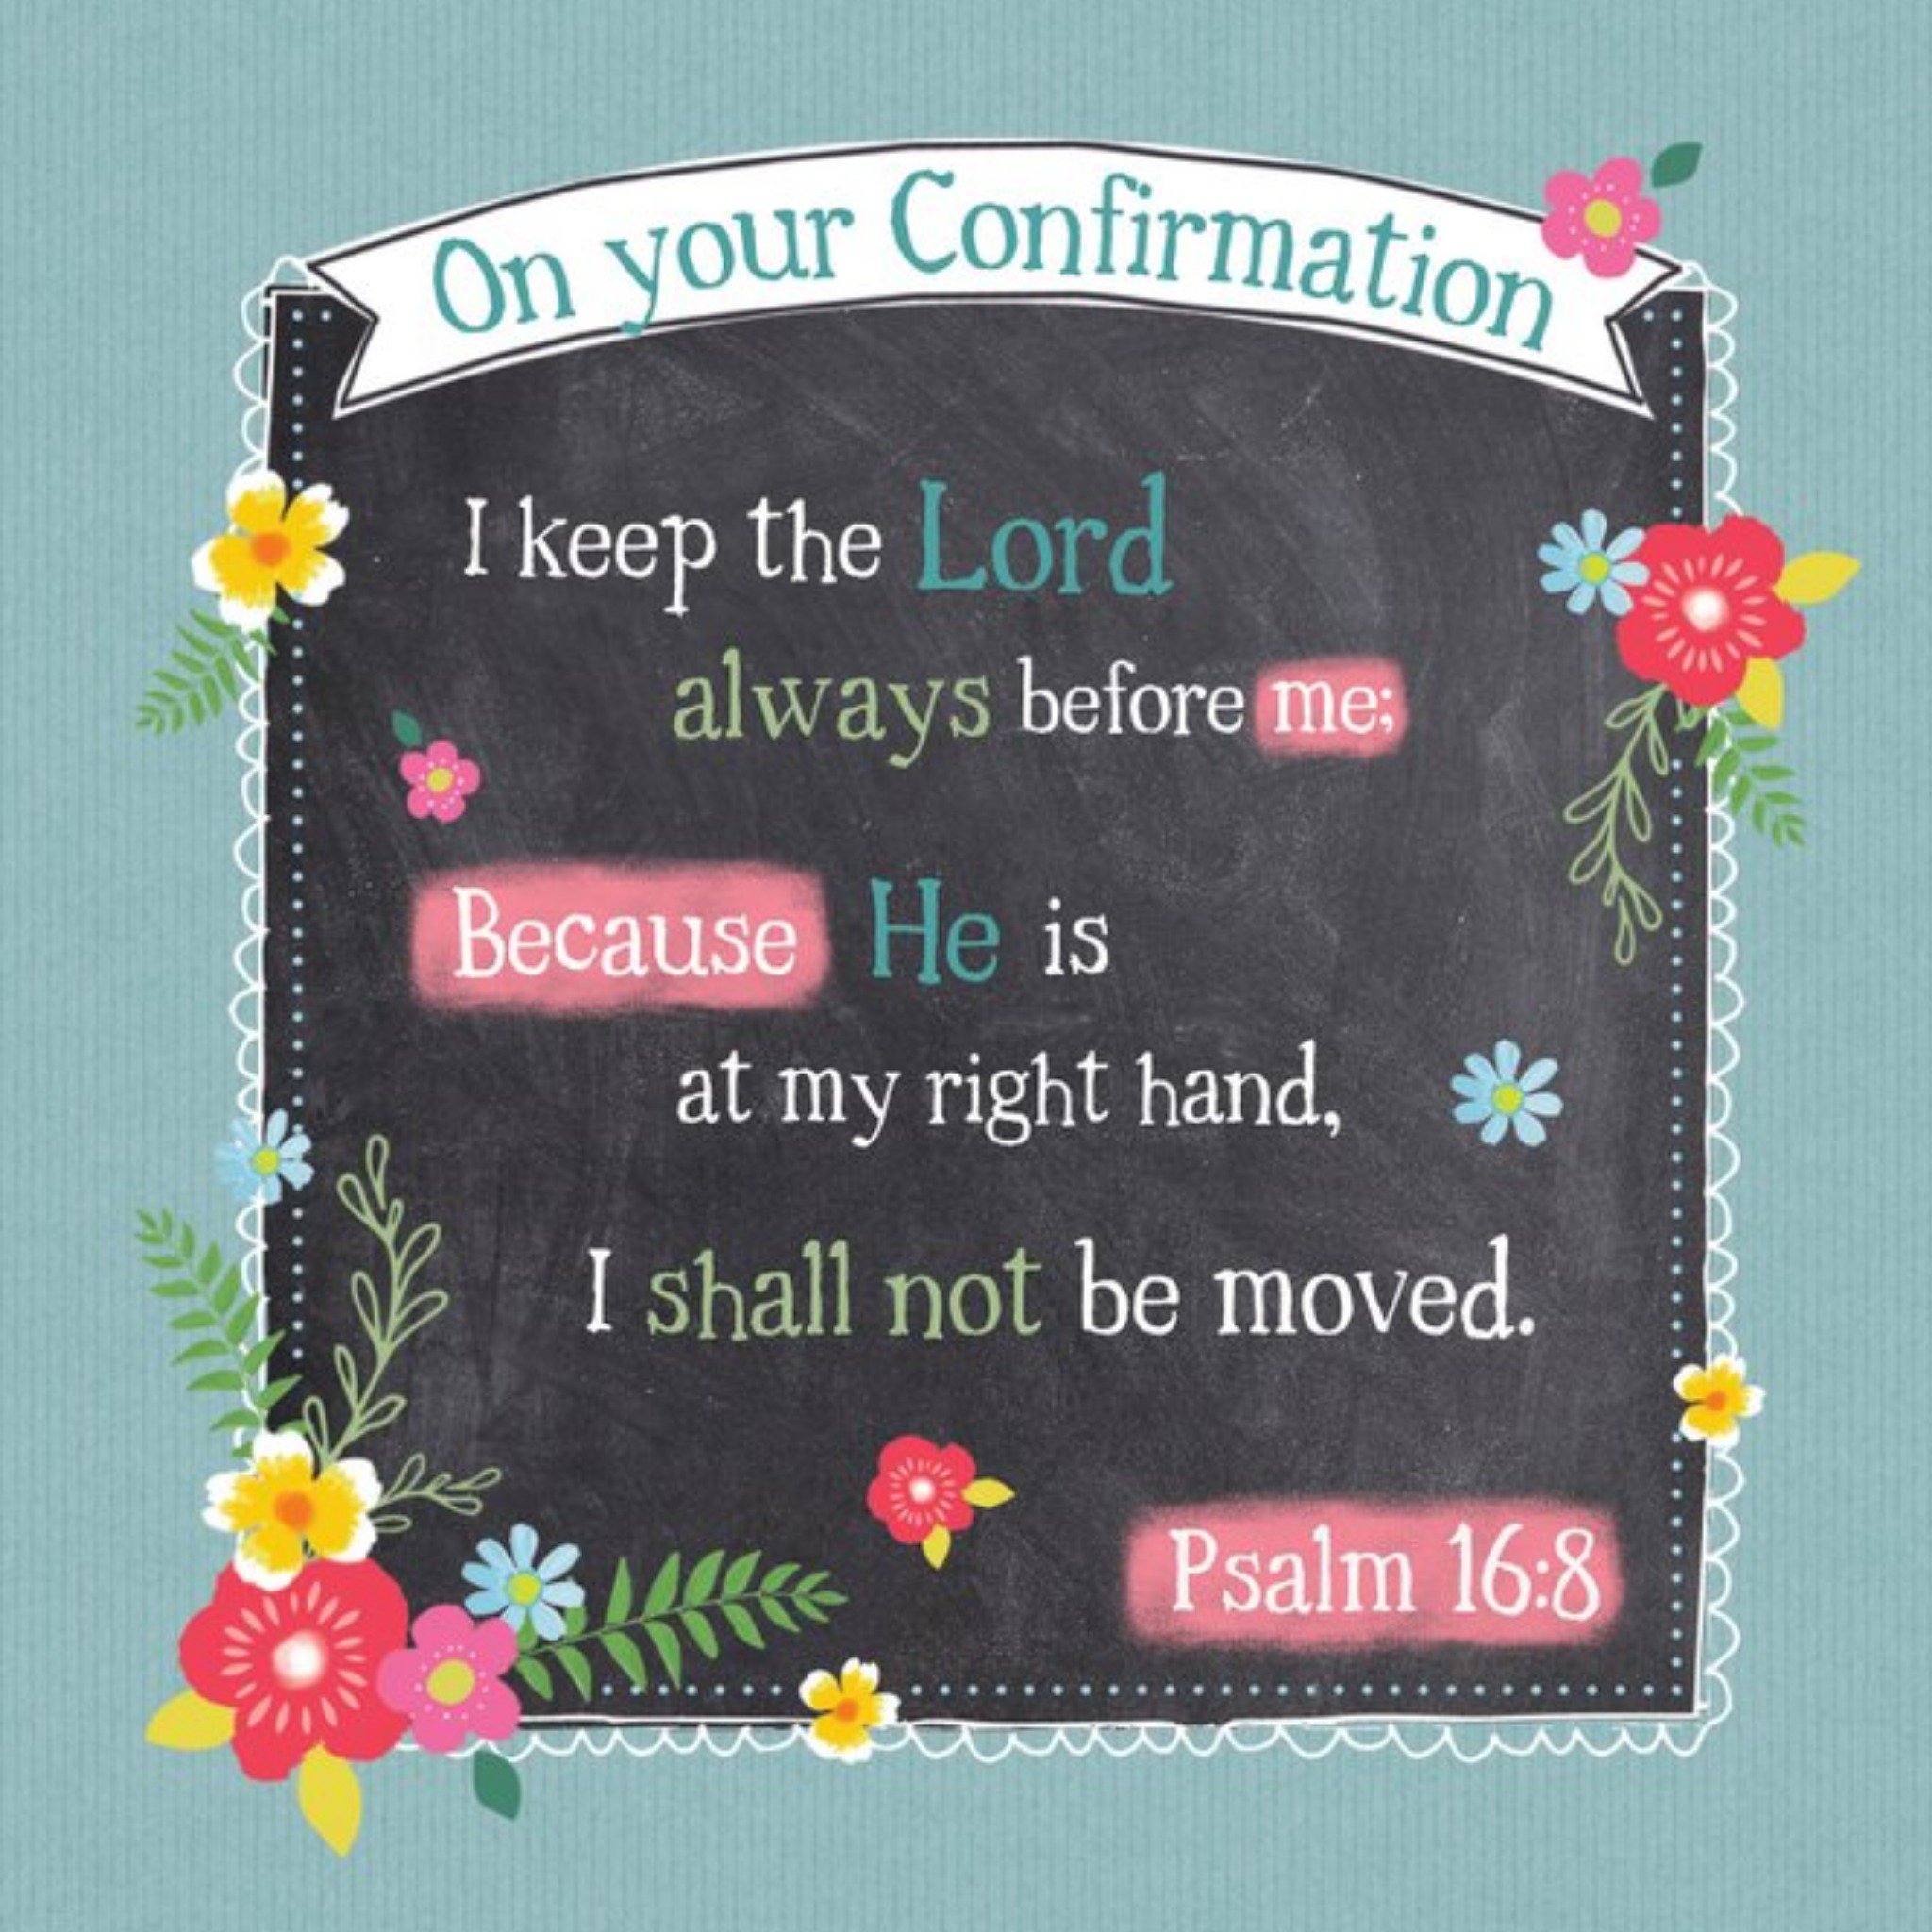 Moonpig Davora Illustrated Chalkboard Verse Confirmation Day Card, Square